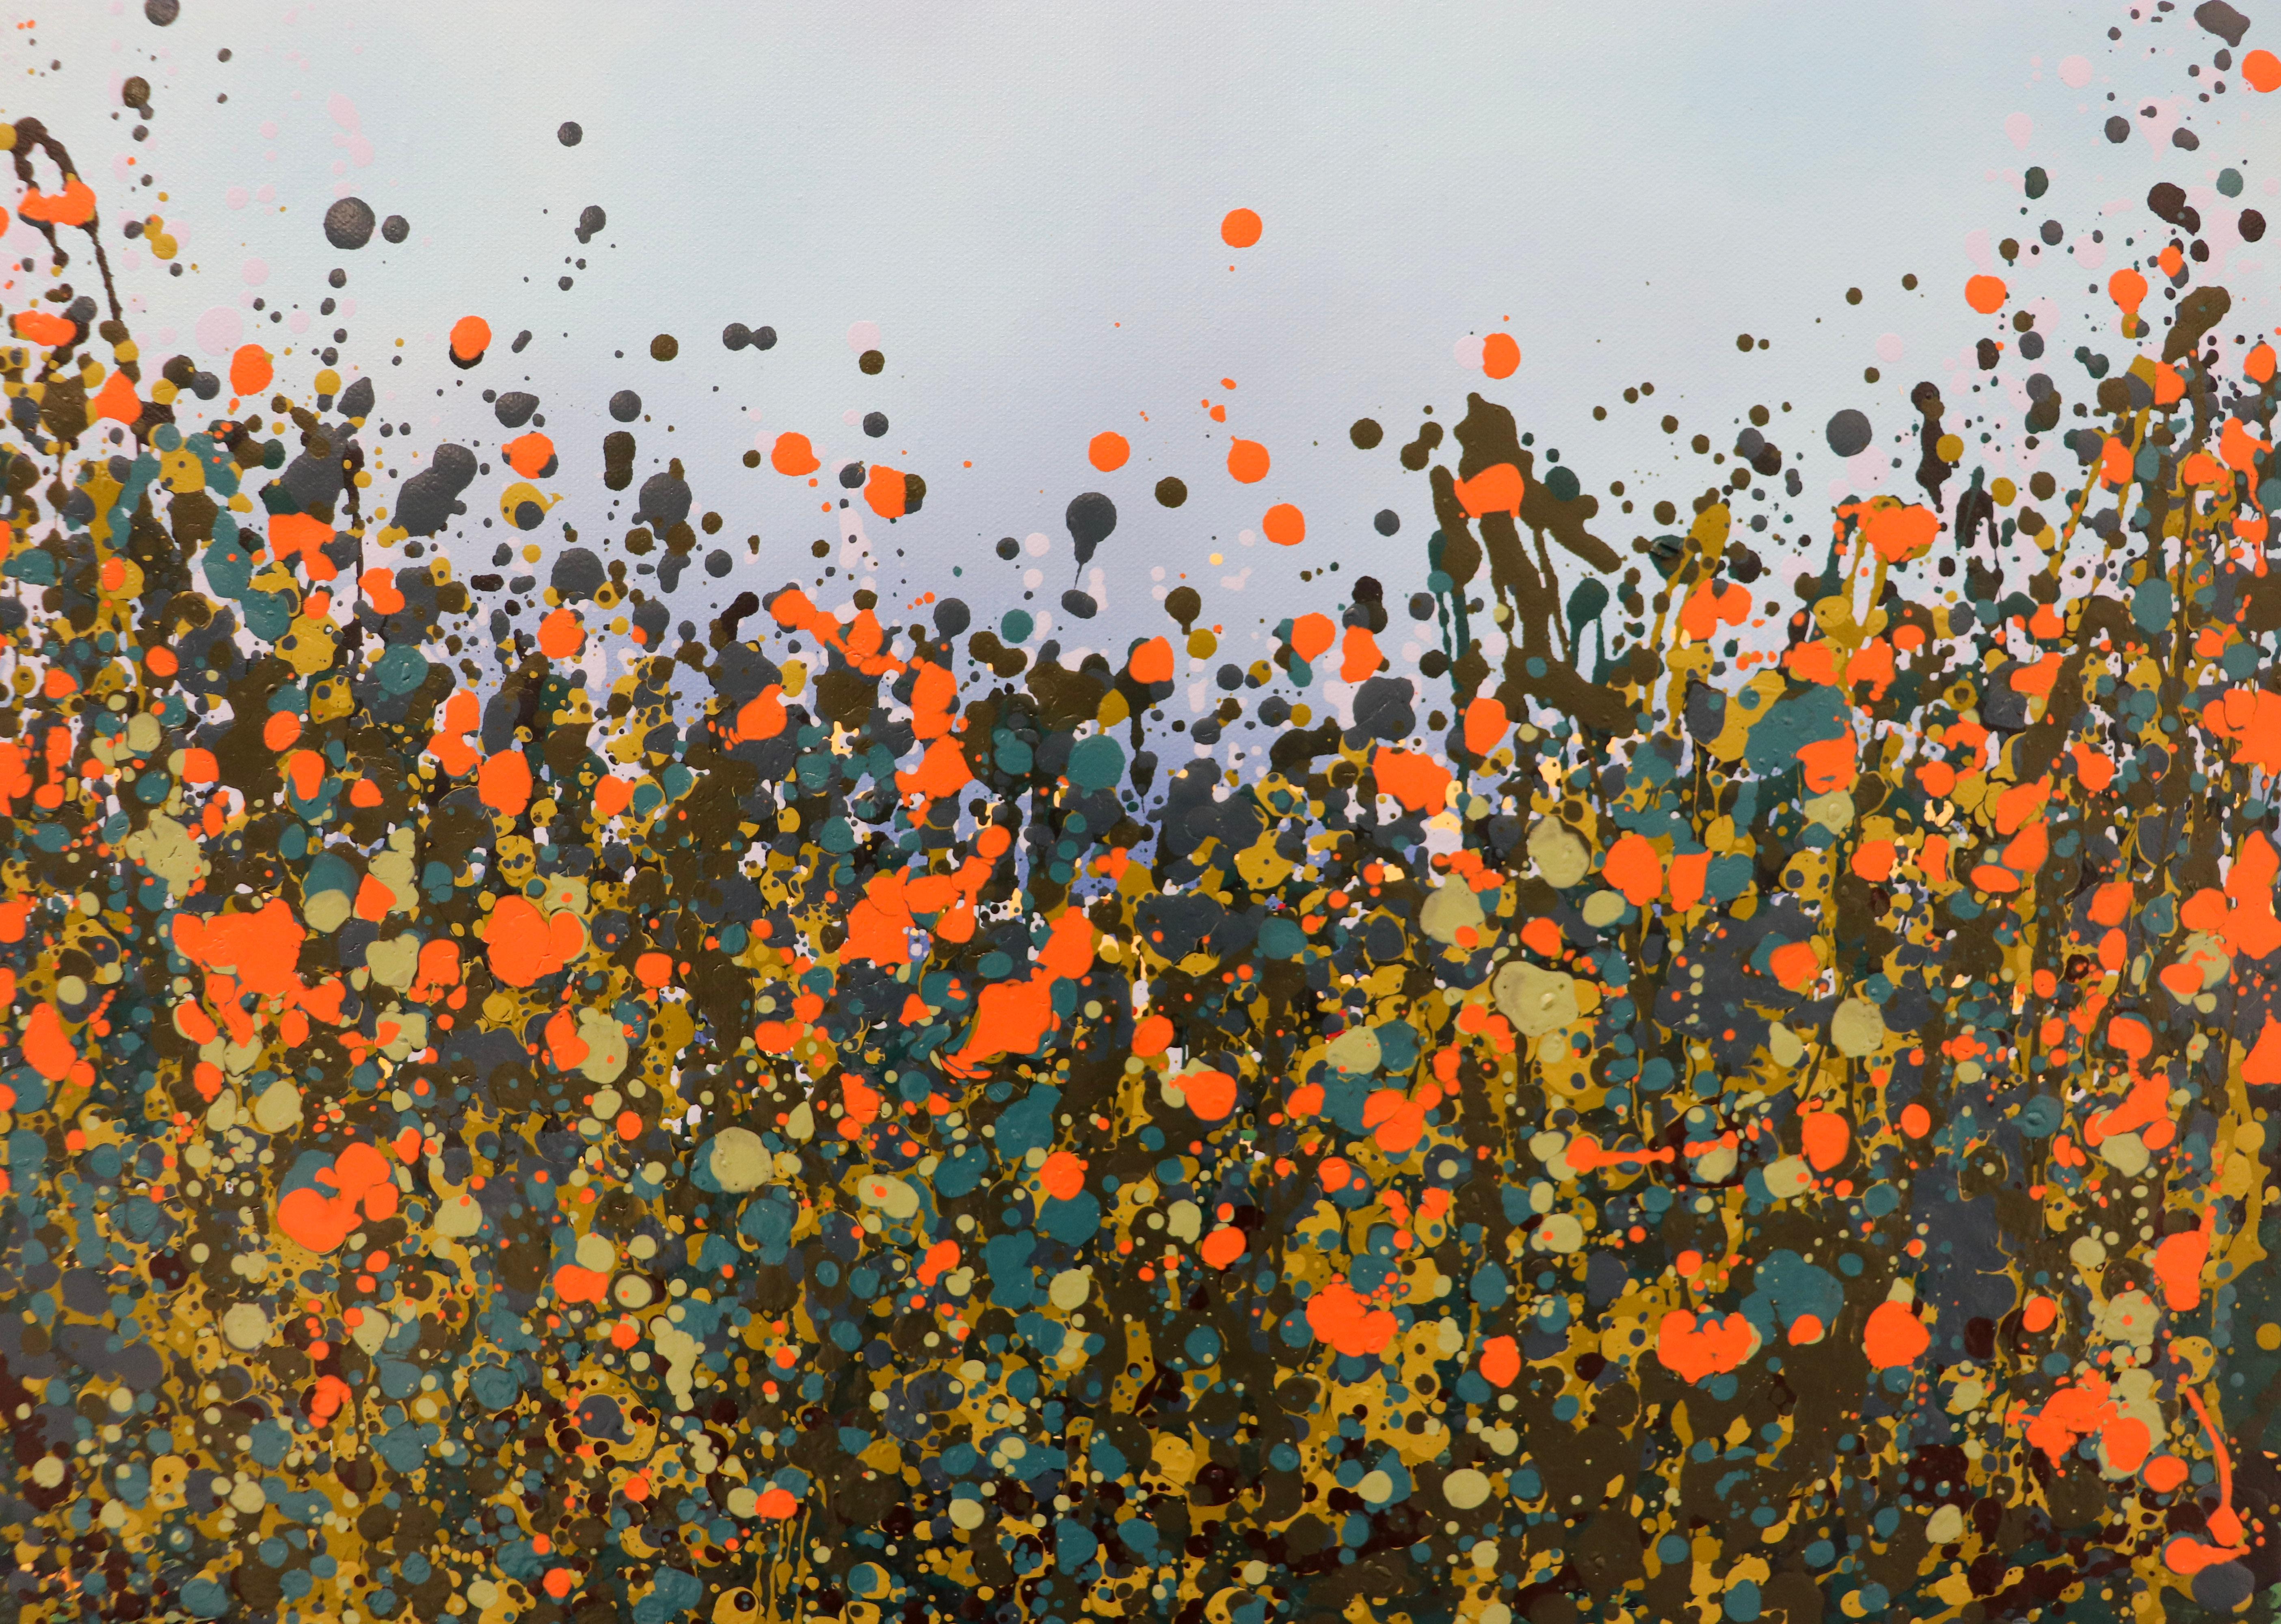 Orange Poppies BY SOPHIE BERGER, Bright Art, Abstract Landscape Painting - Gray Abstract Painting by Sophie Berger